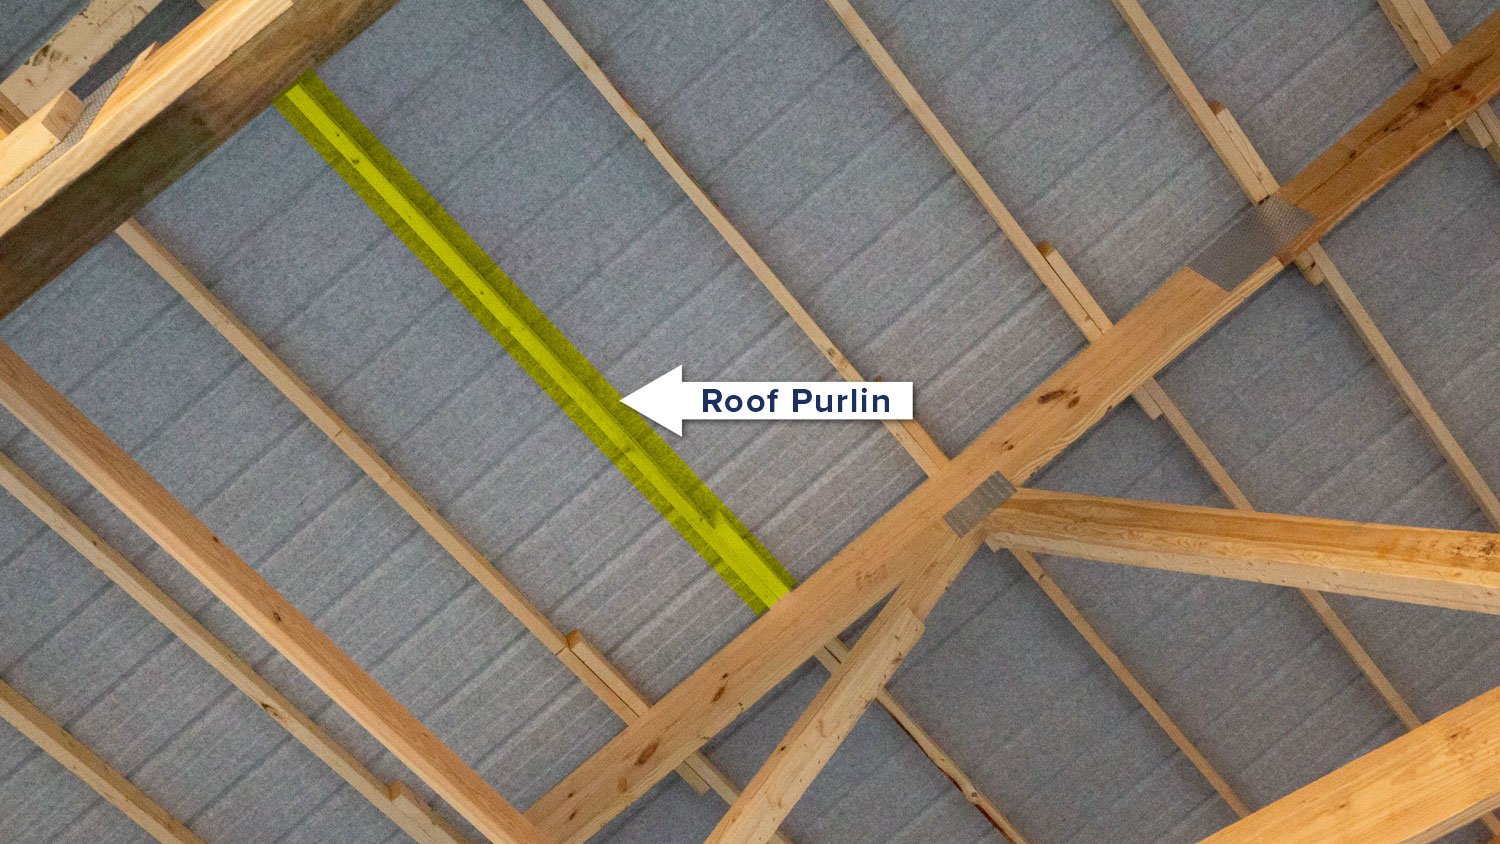 What is a Roof Purlin, and Why is it Important?